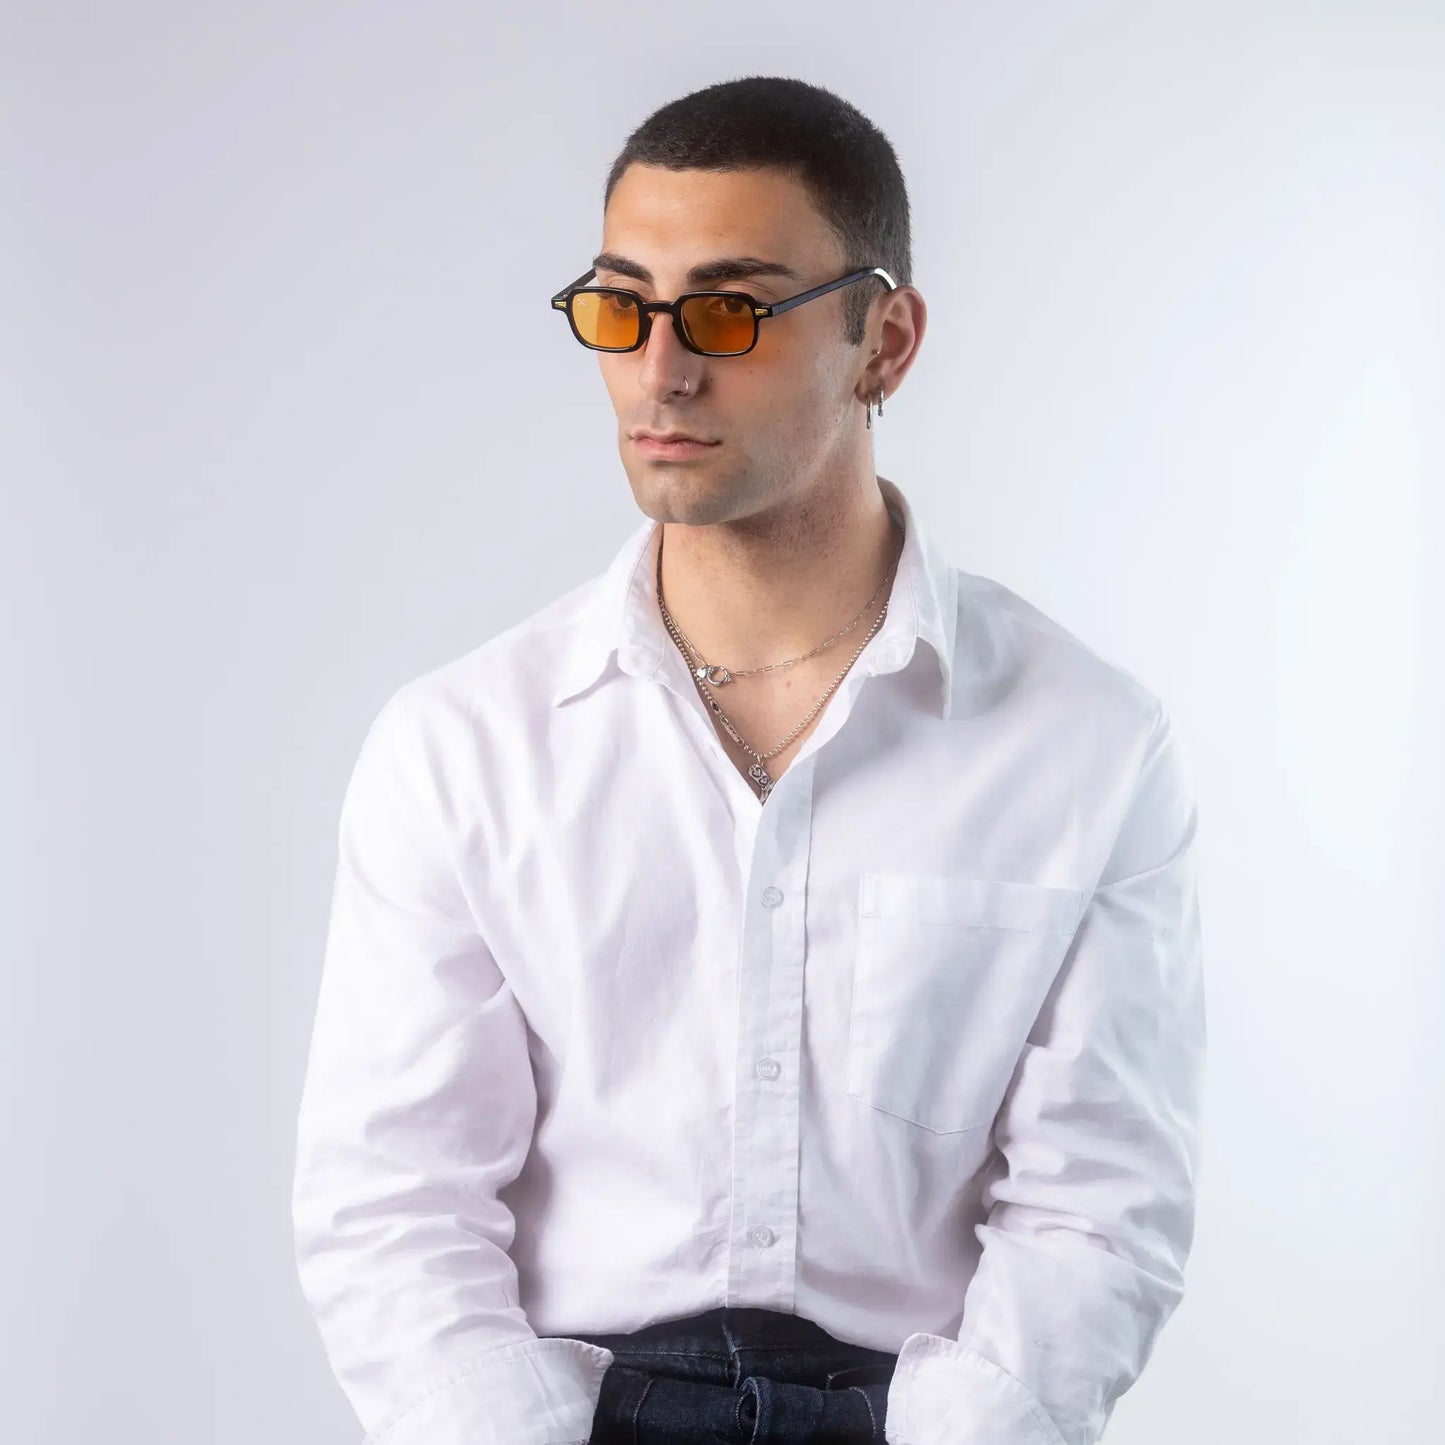 A male model wearing Exposure Sunglasses polarized sunglasses with black frames and orange lenses, posing against a white background.